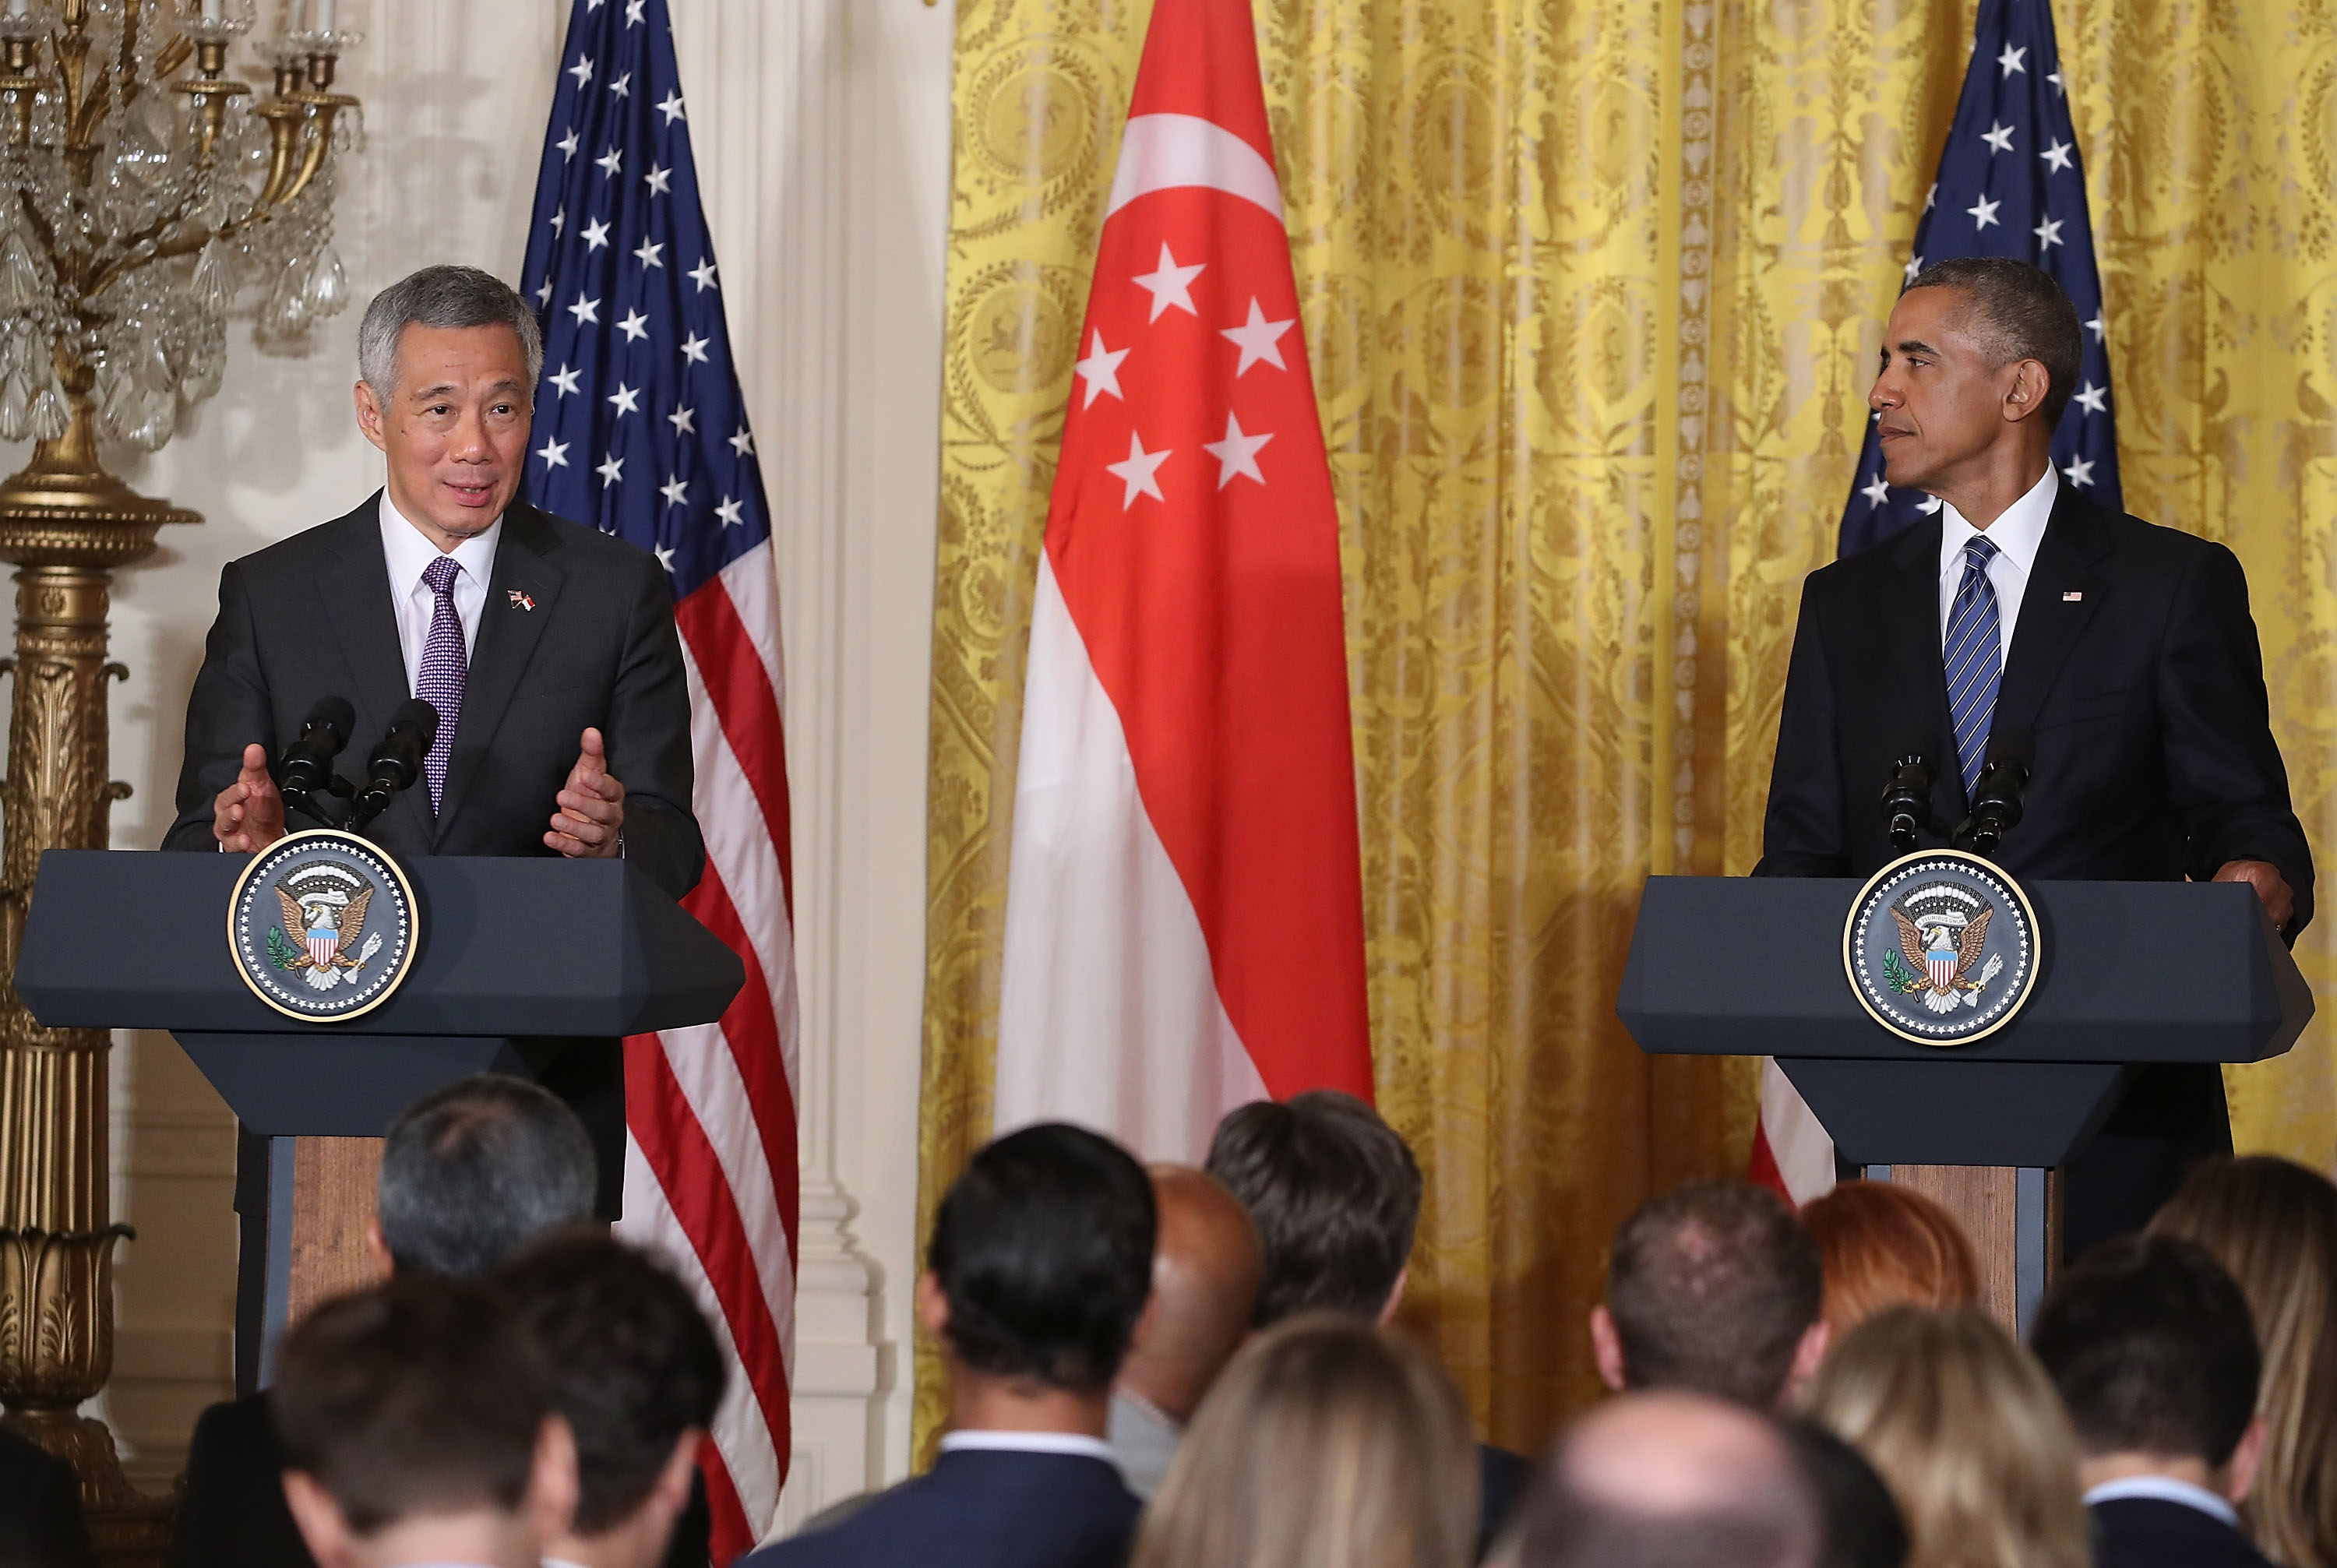 WASHINGTON, DC - AUGUST 02: US President Barack Obama, (R), and Singapore's Prime Minister Lee Hsien Loong, speak to the media during a news conference in the East Room at the White House August 2, 2016 in Washington, DC. Later this evening President Obama will host a State Dinner for Prime Minister Loong and his wife Ho Ching. (Photo by Mark Wilson/Getty Images)